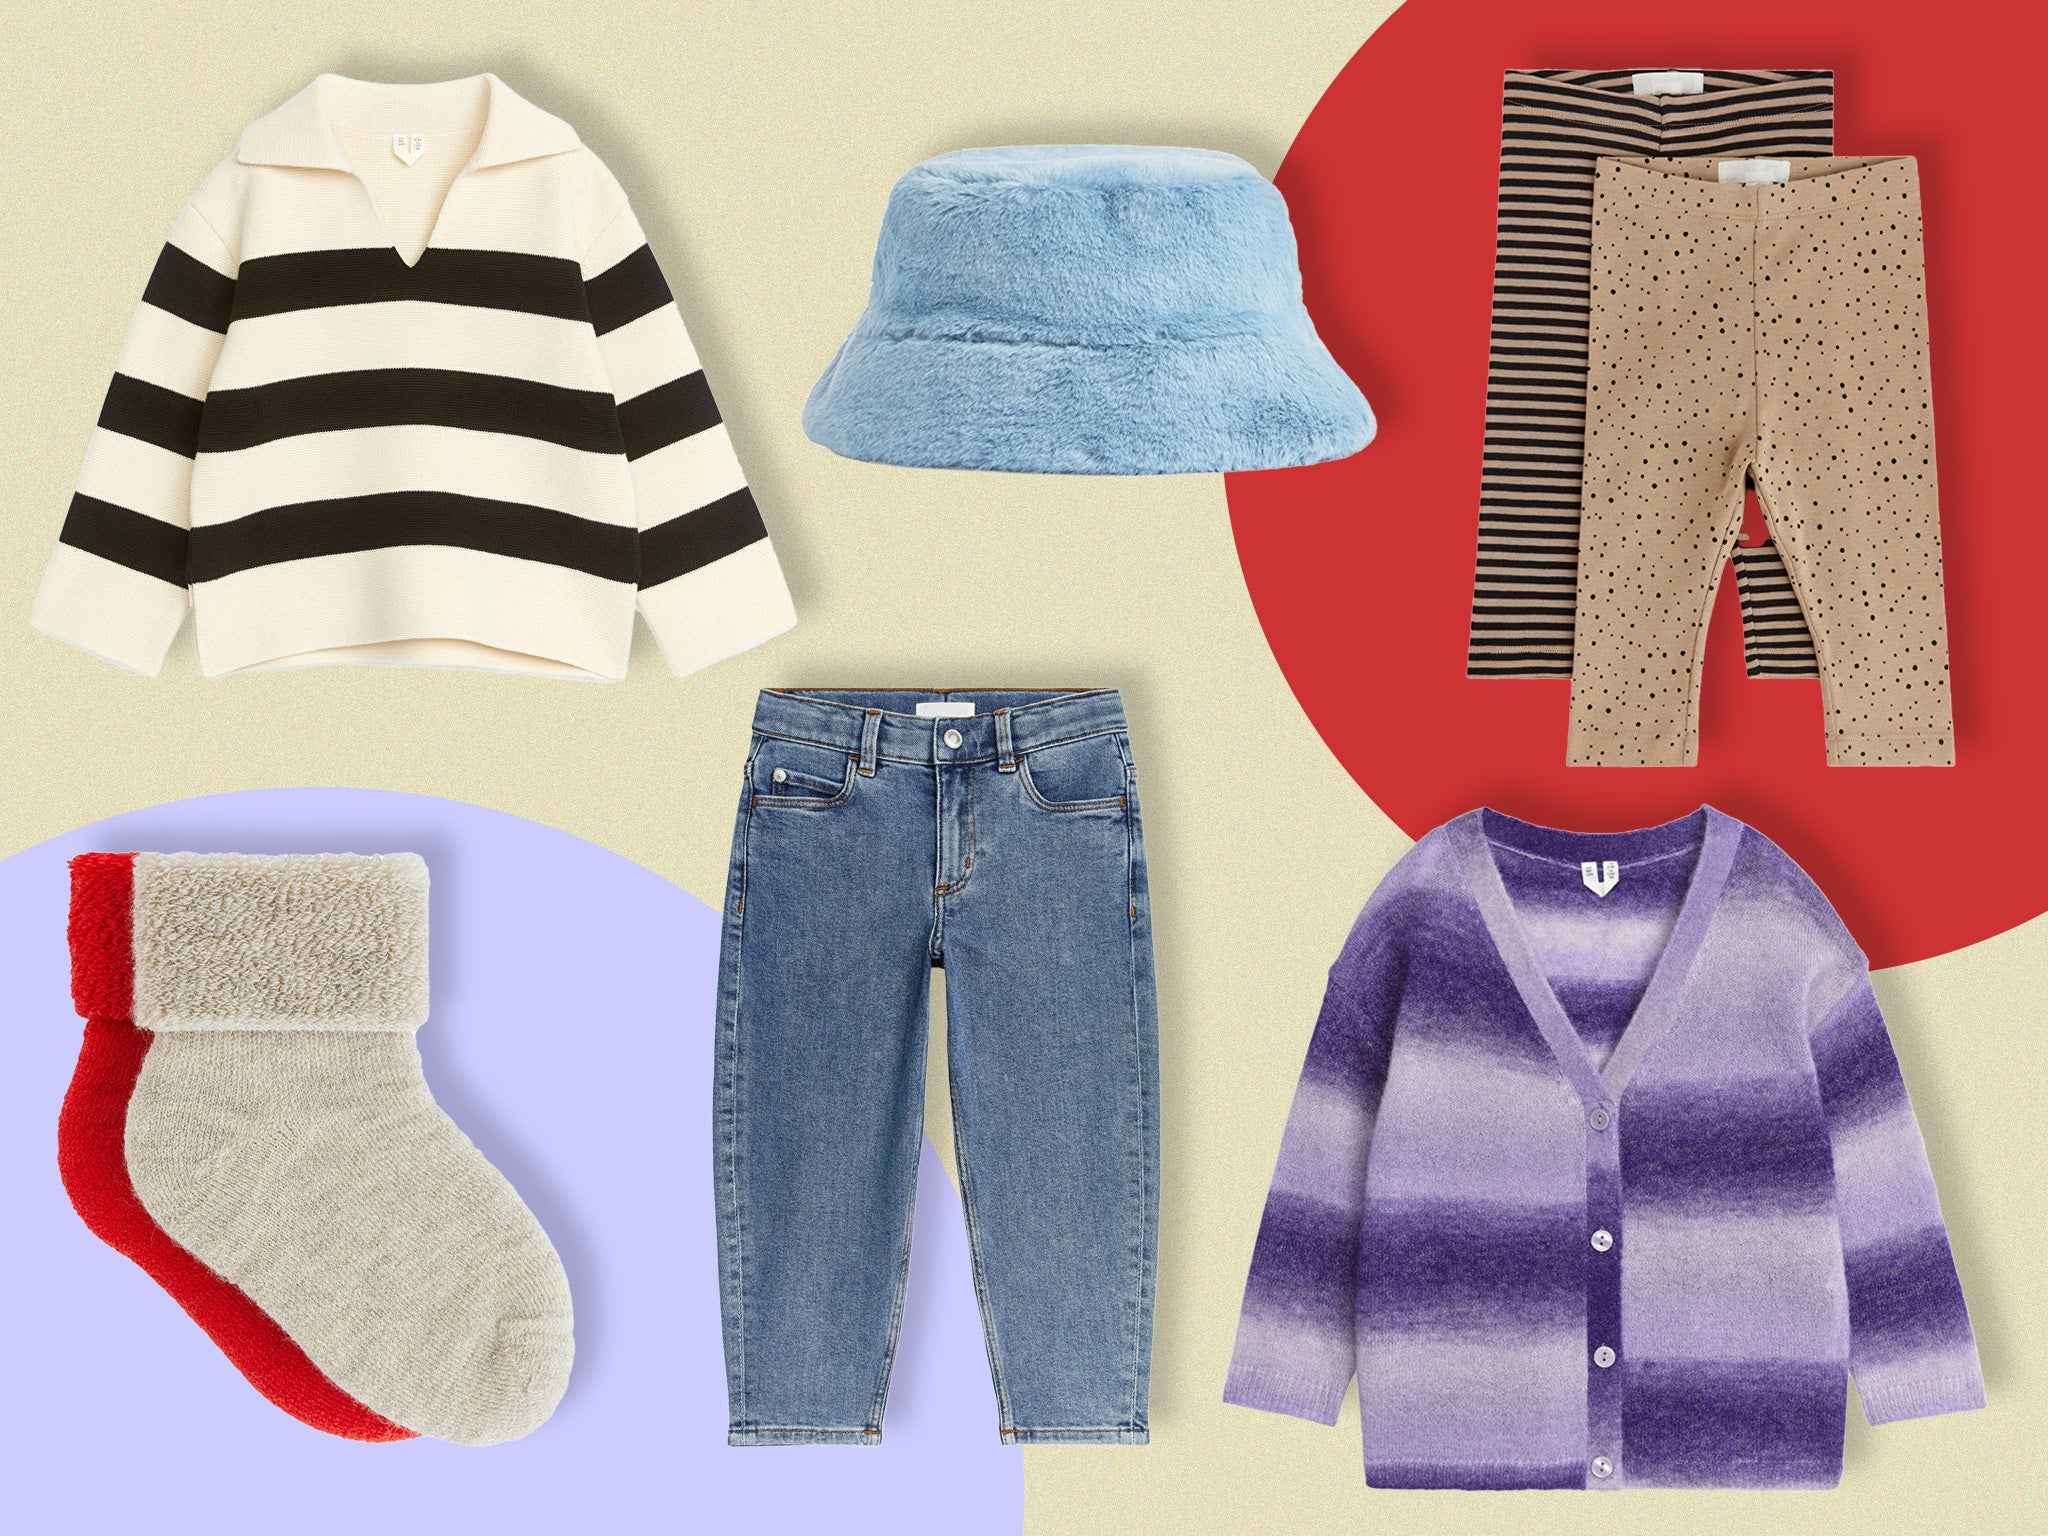 Whatever the occasion, these are the garms we think kids (and caregivers) will love